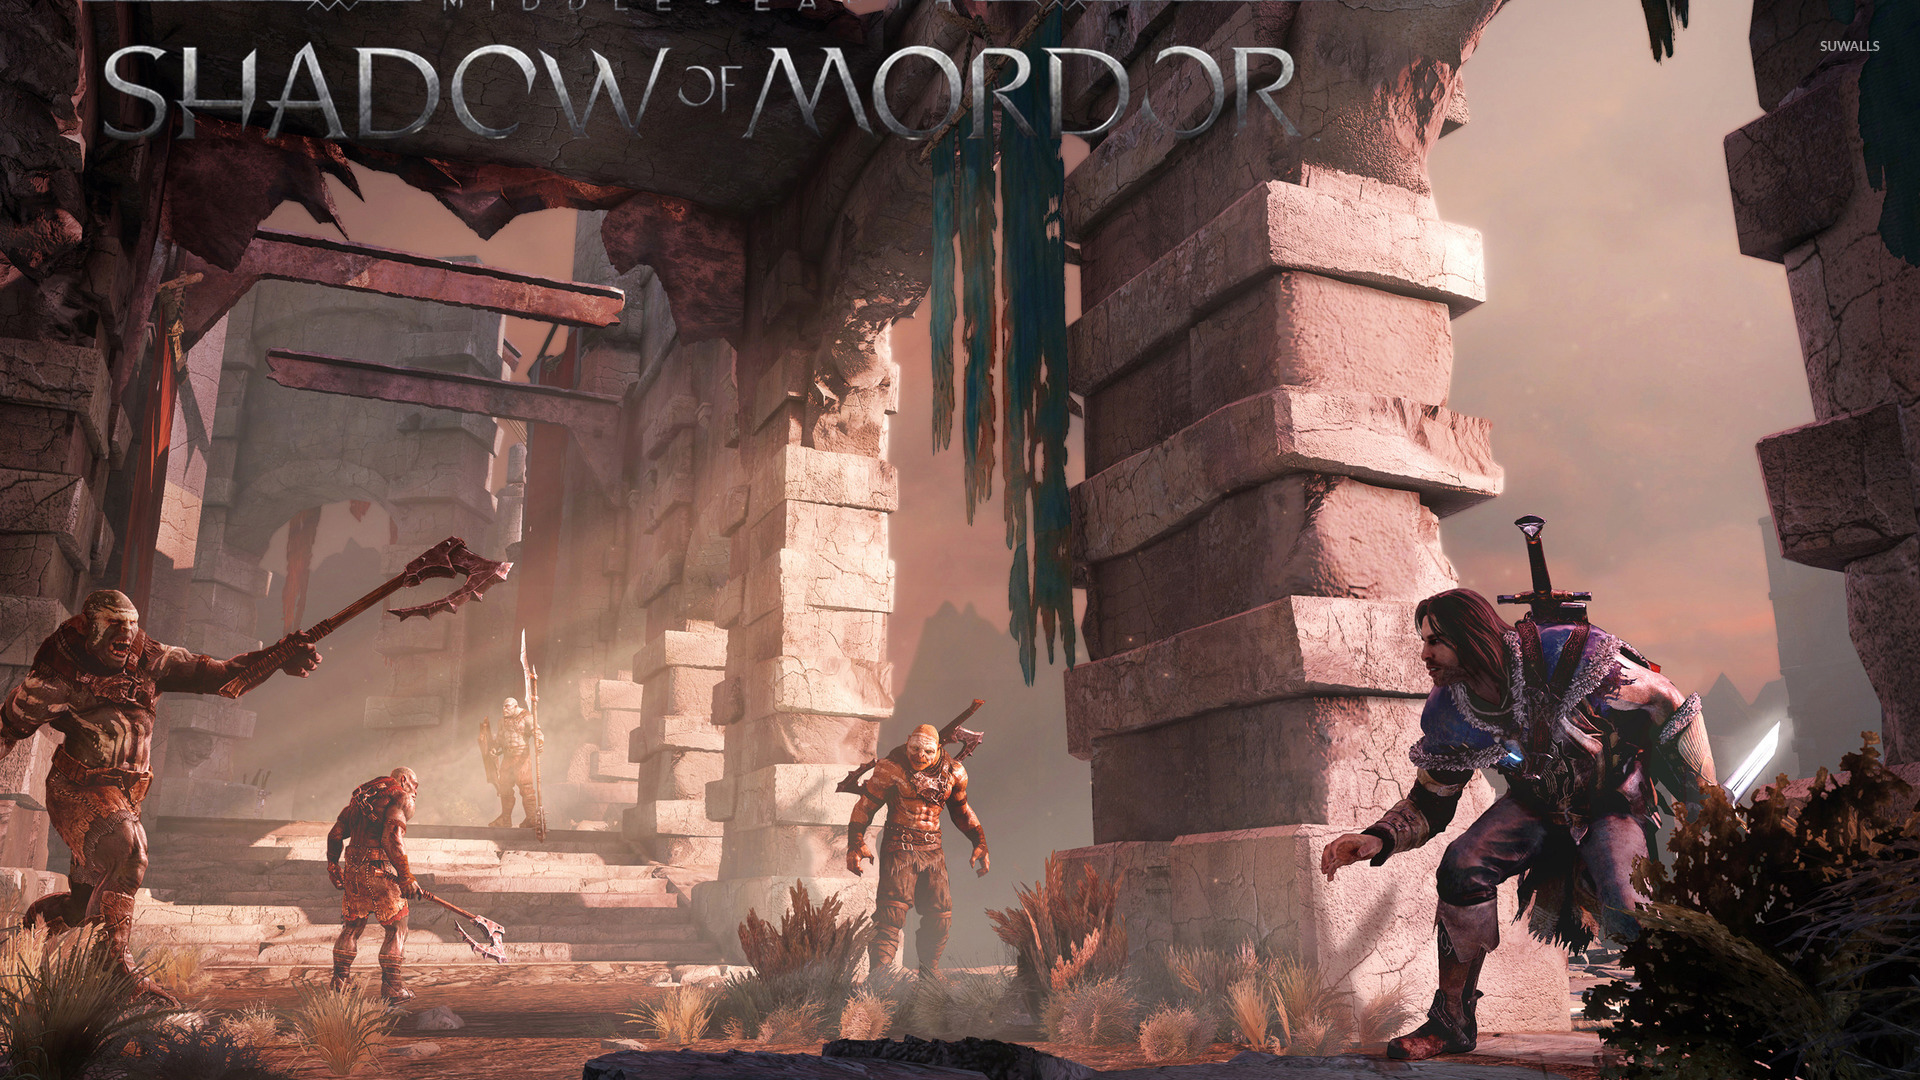 Middle earth Shadow of Mordor [13] wallpaper   Game